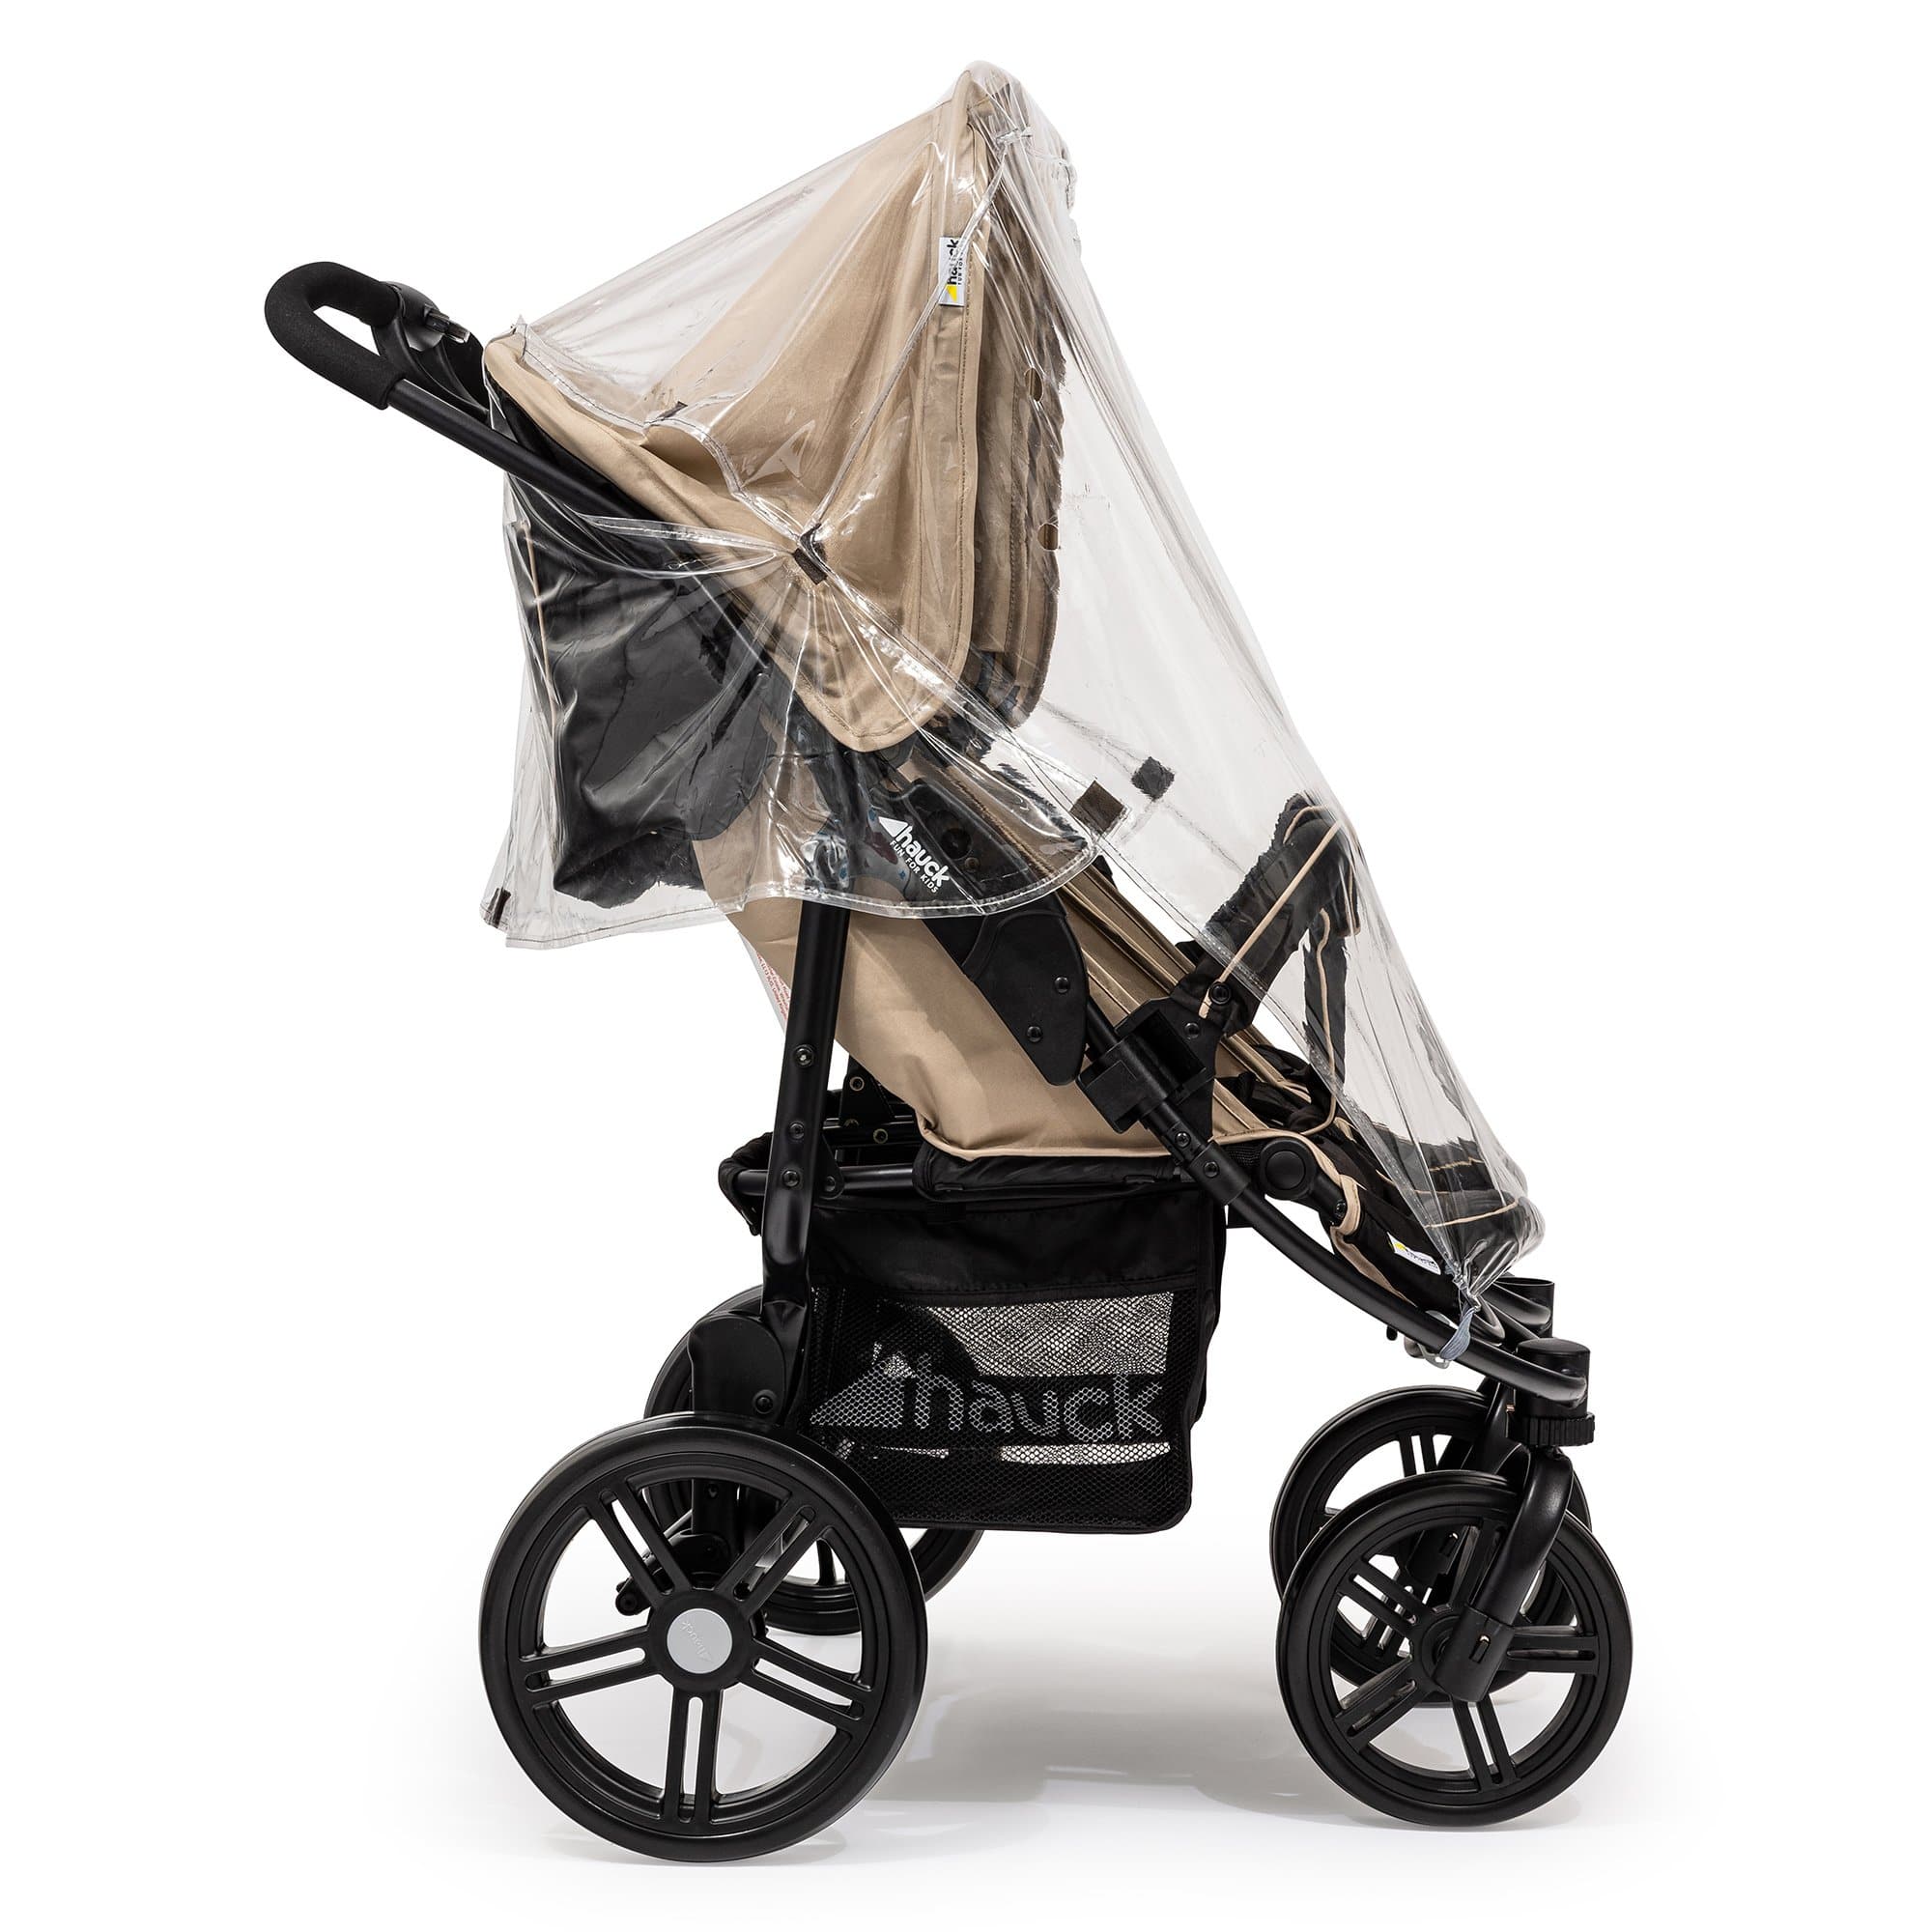 Universal Rain Cover For All Side By Side Pushchairs - Fits All Models - For Your Little One